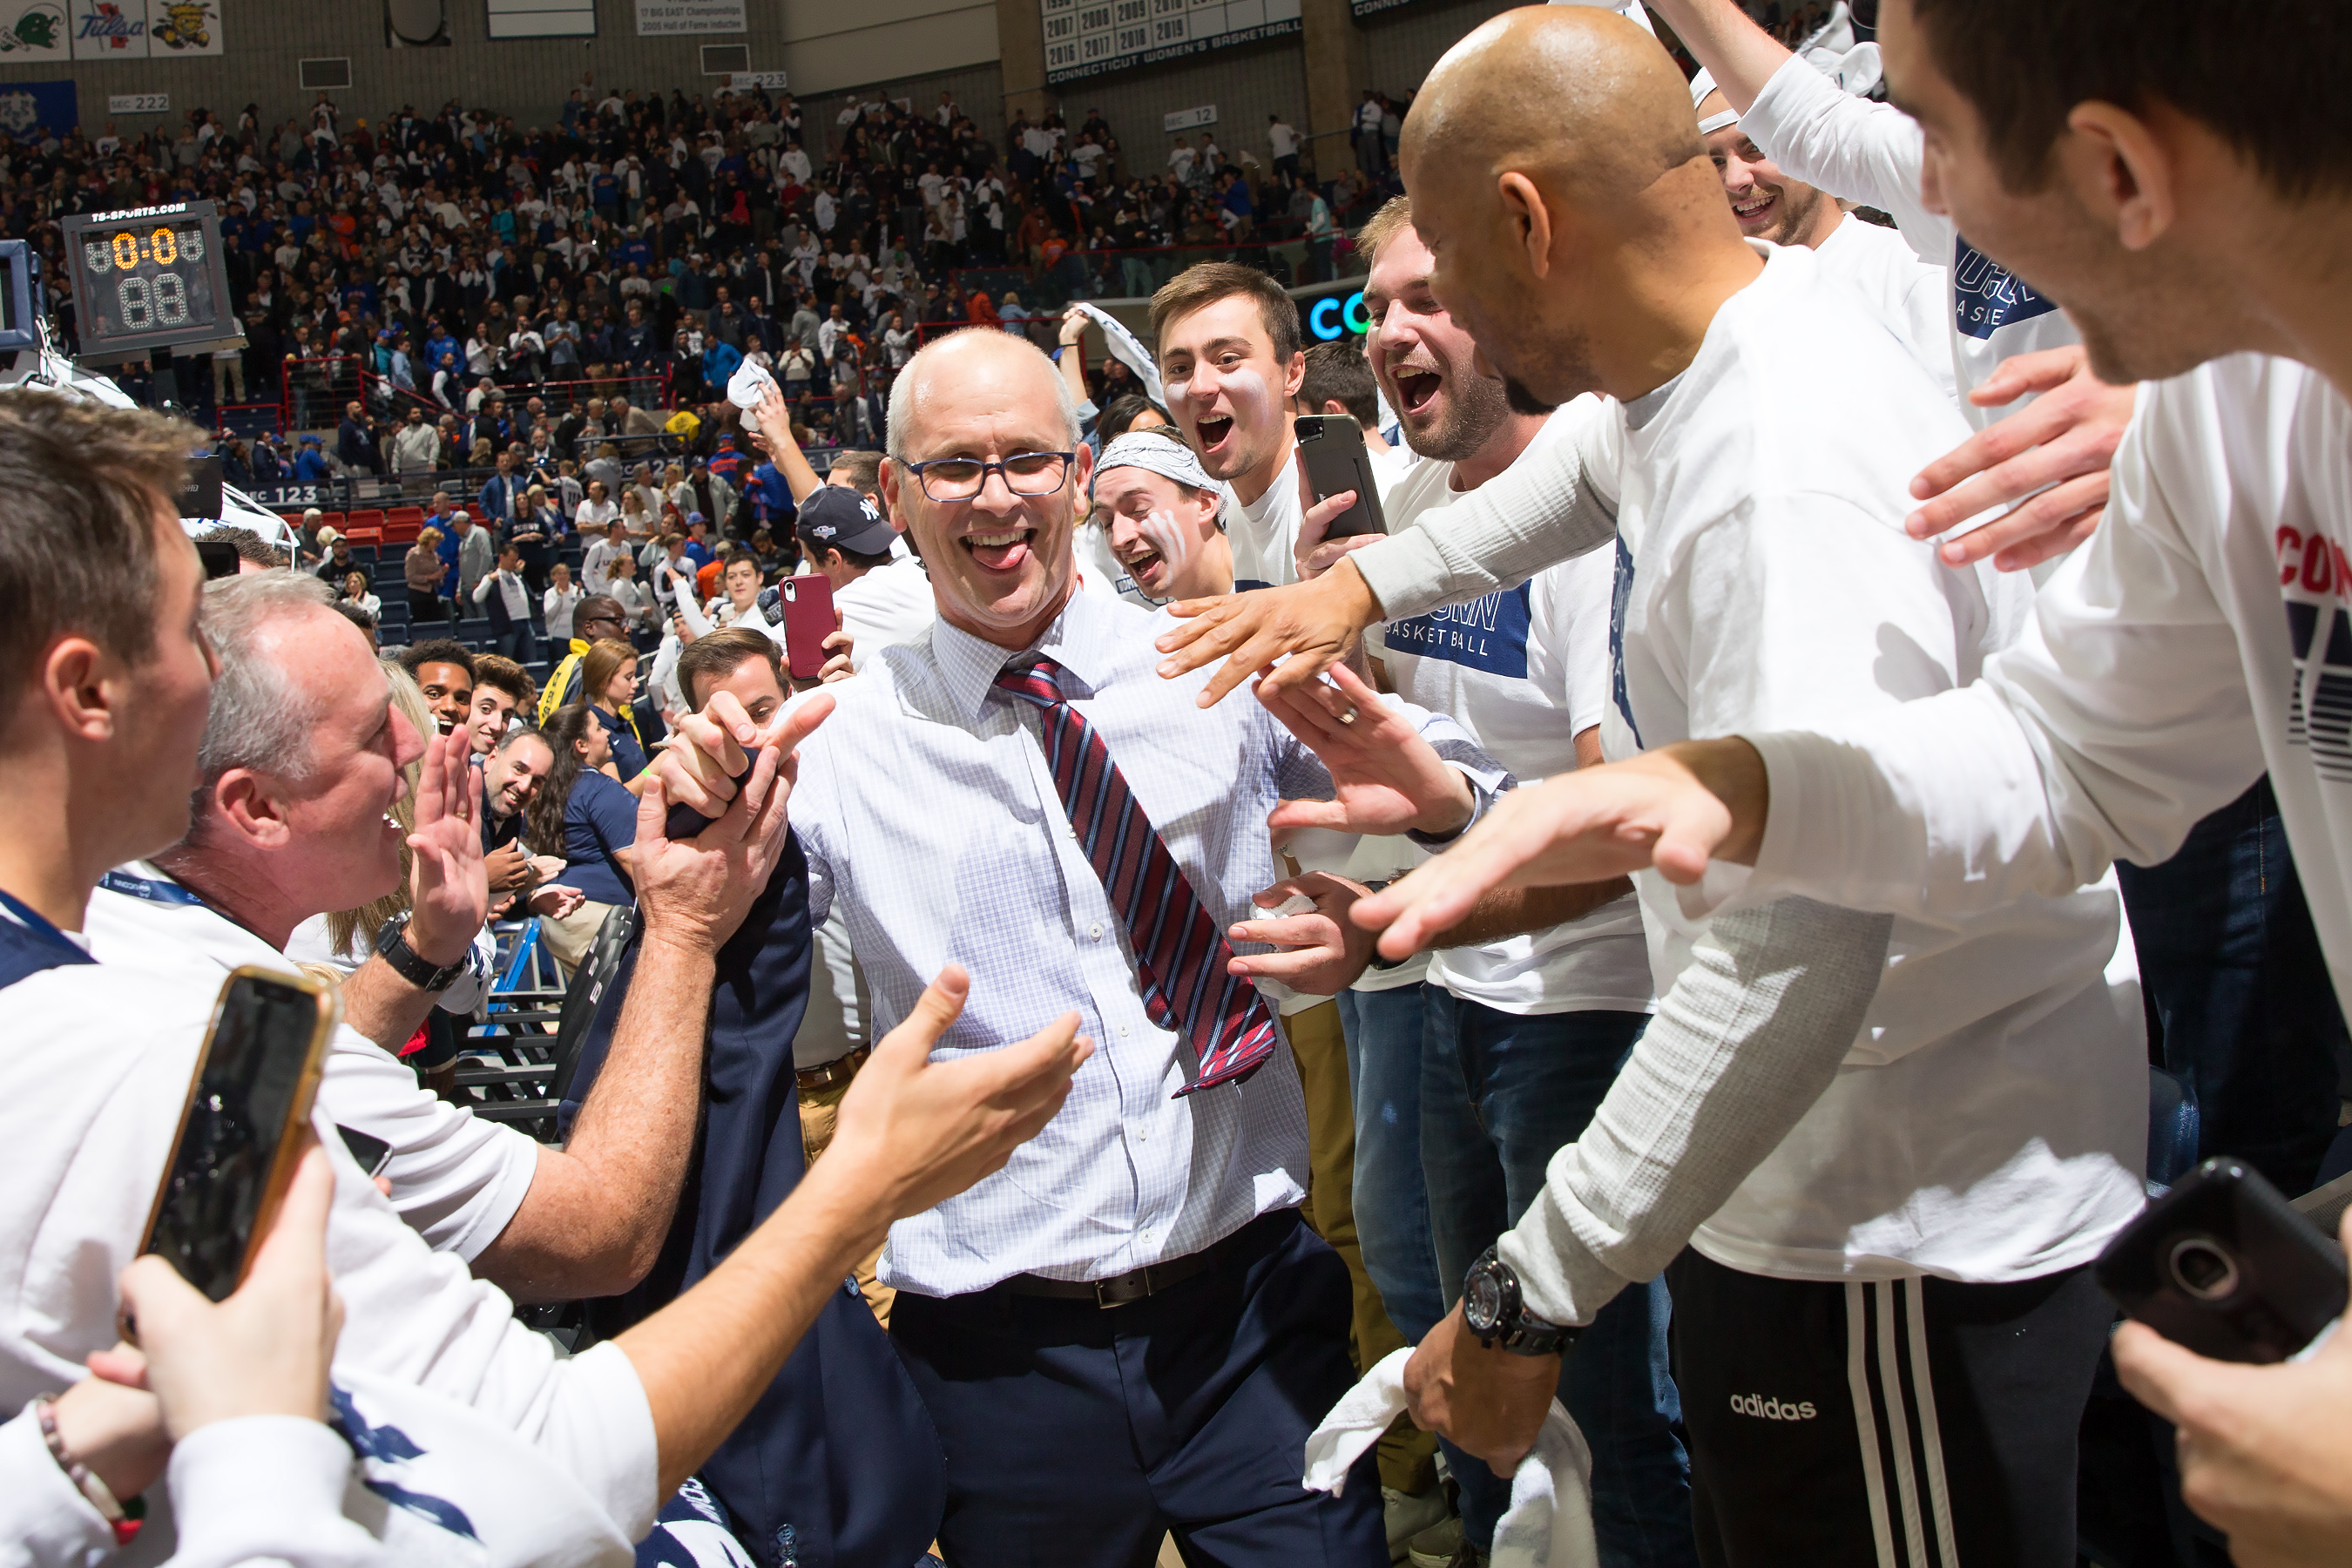 Dan Hurley's Family: 5 Fast Facts